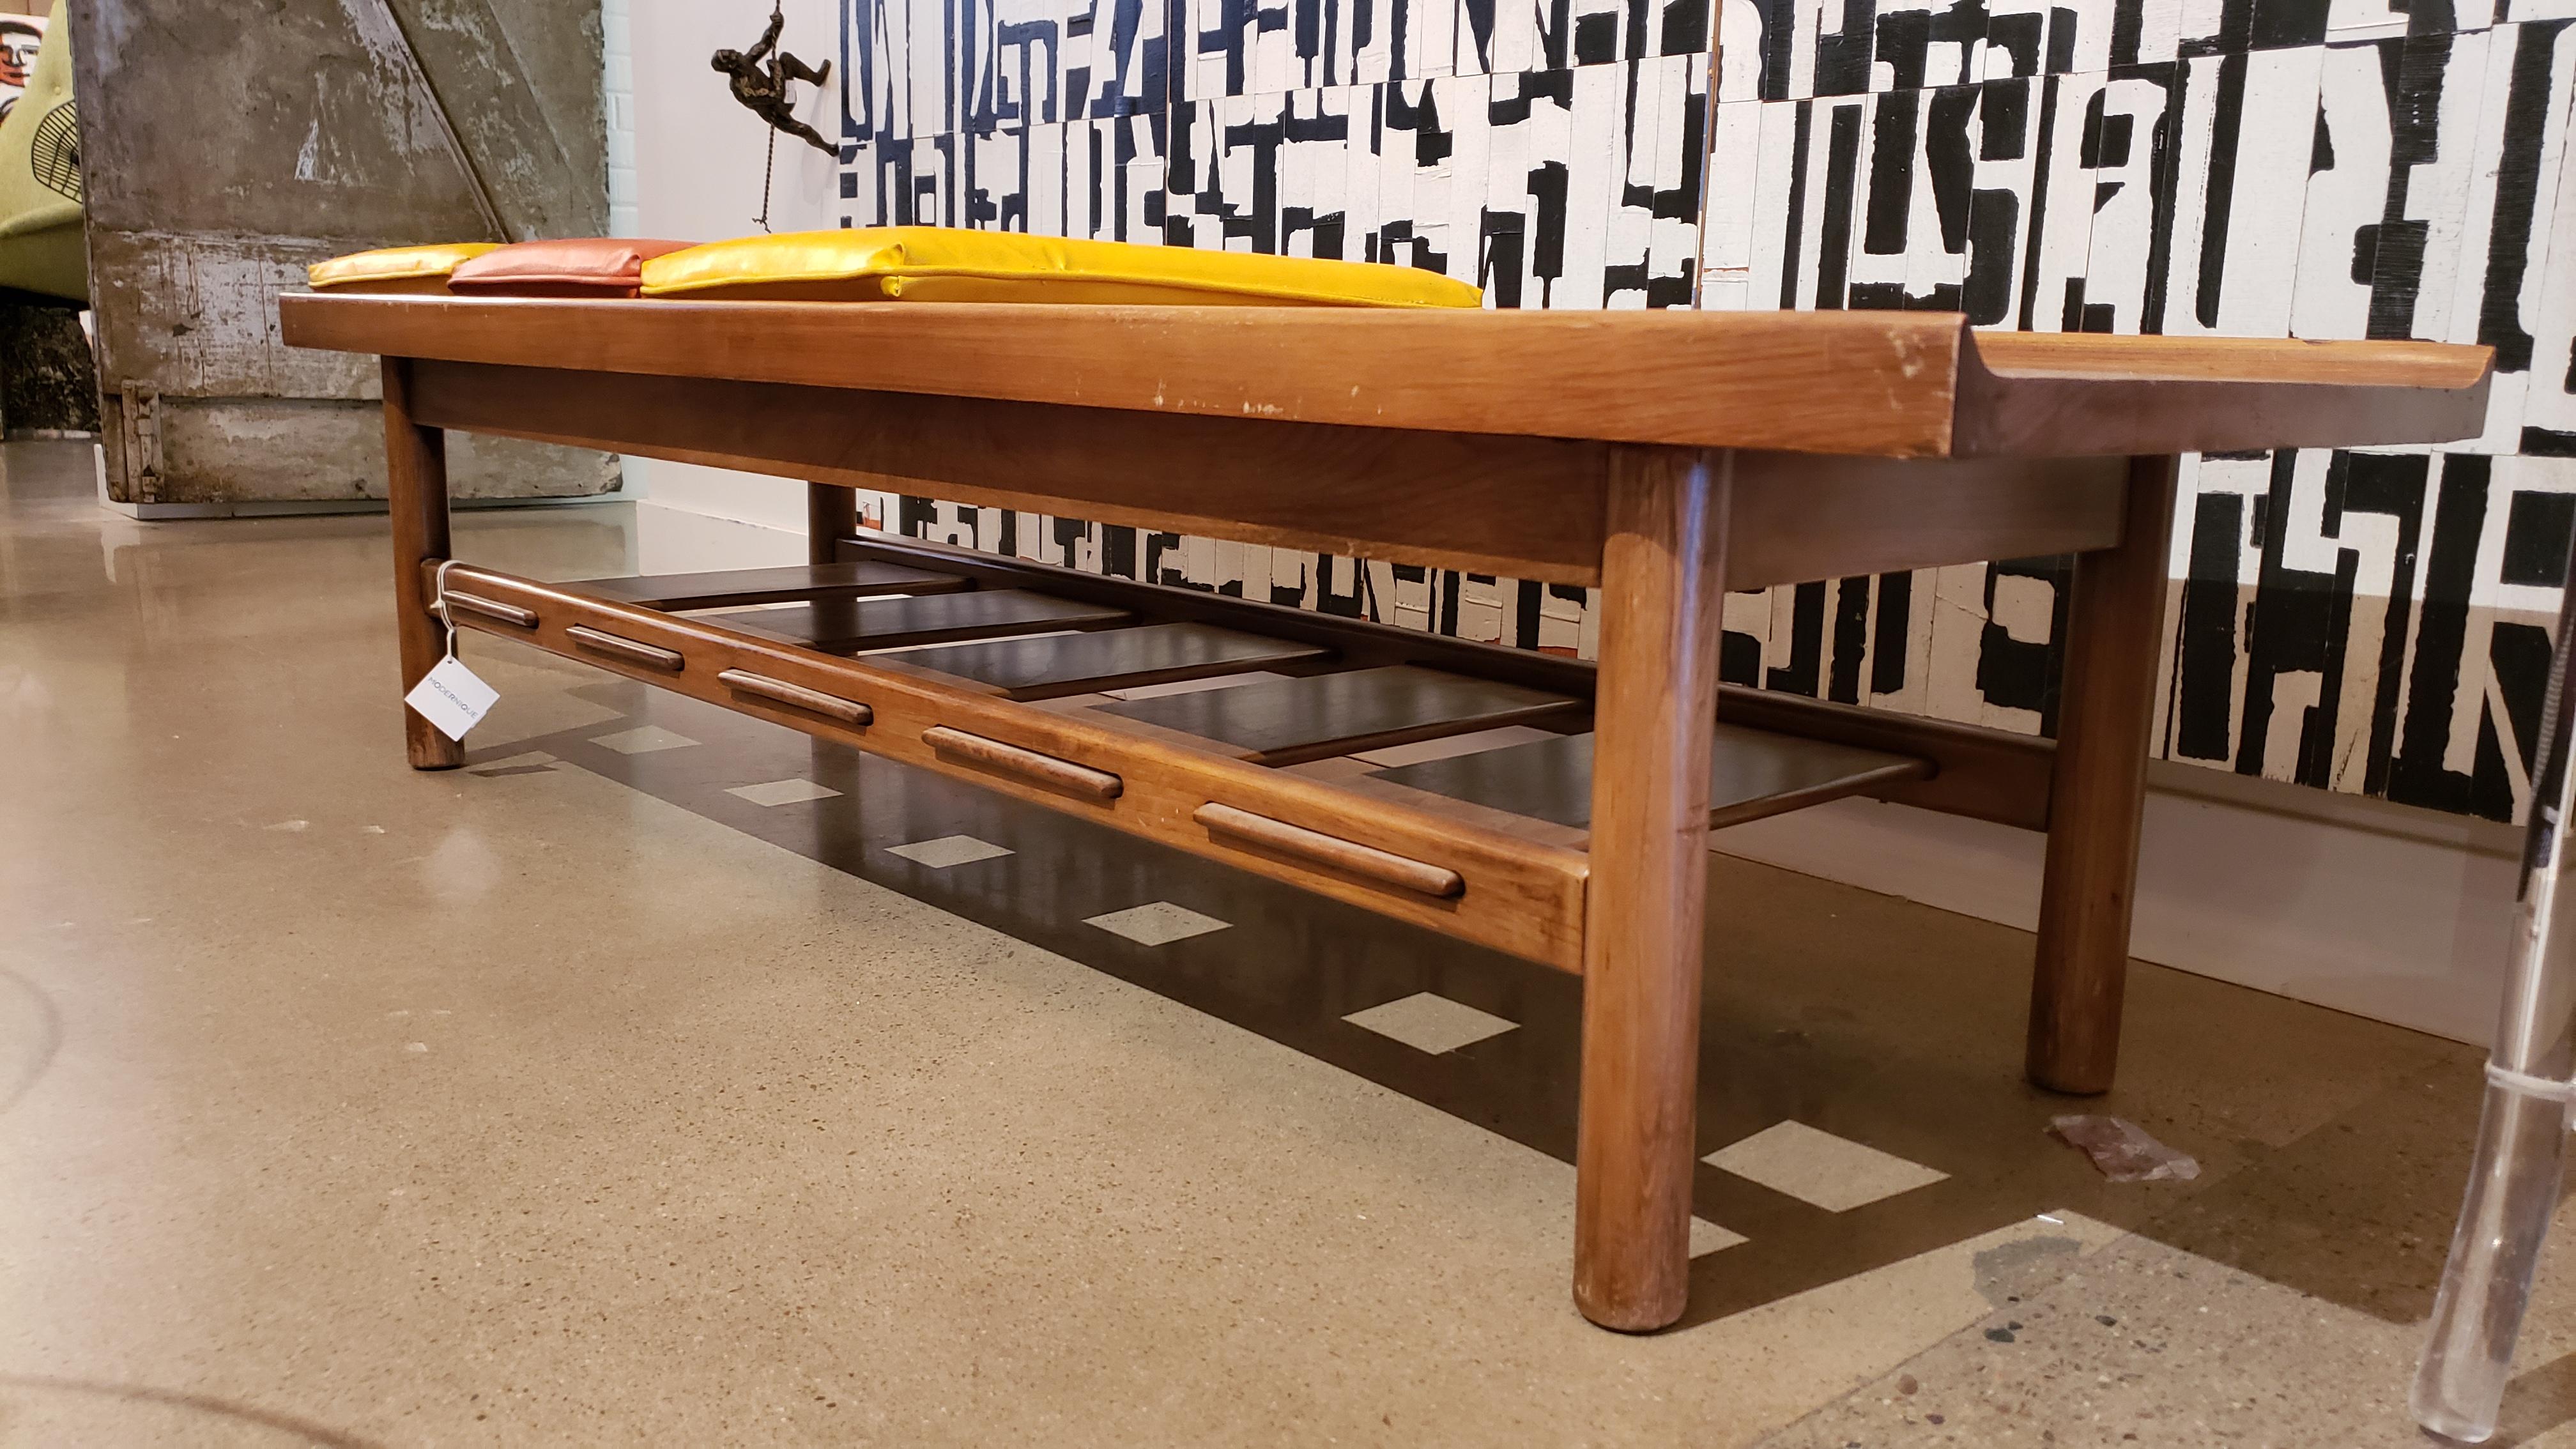 This walnut wood bench is very heavy and substantial. It is arranged with three original vinyl cushions in orange and yellow- characteristic colors of the 1950s.